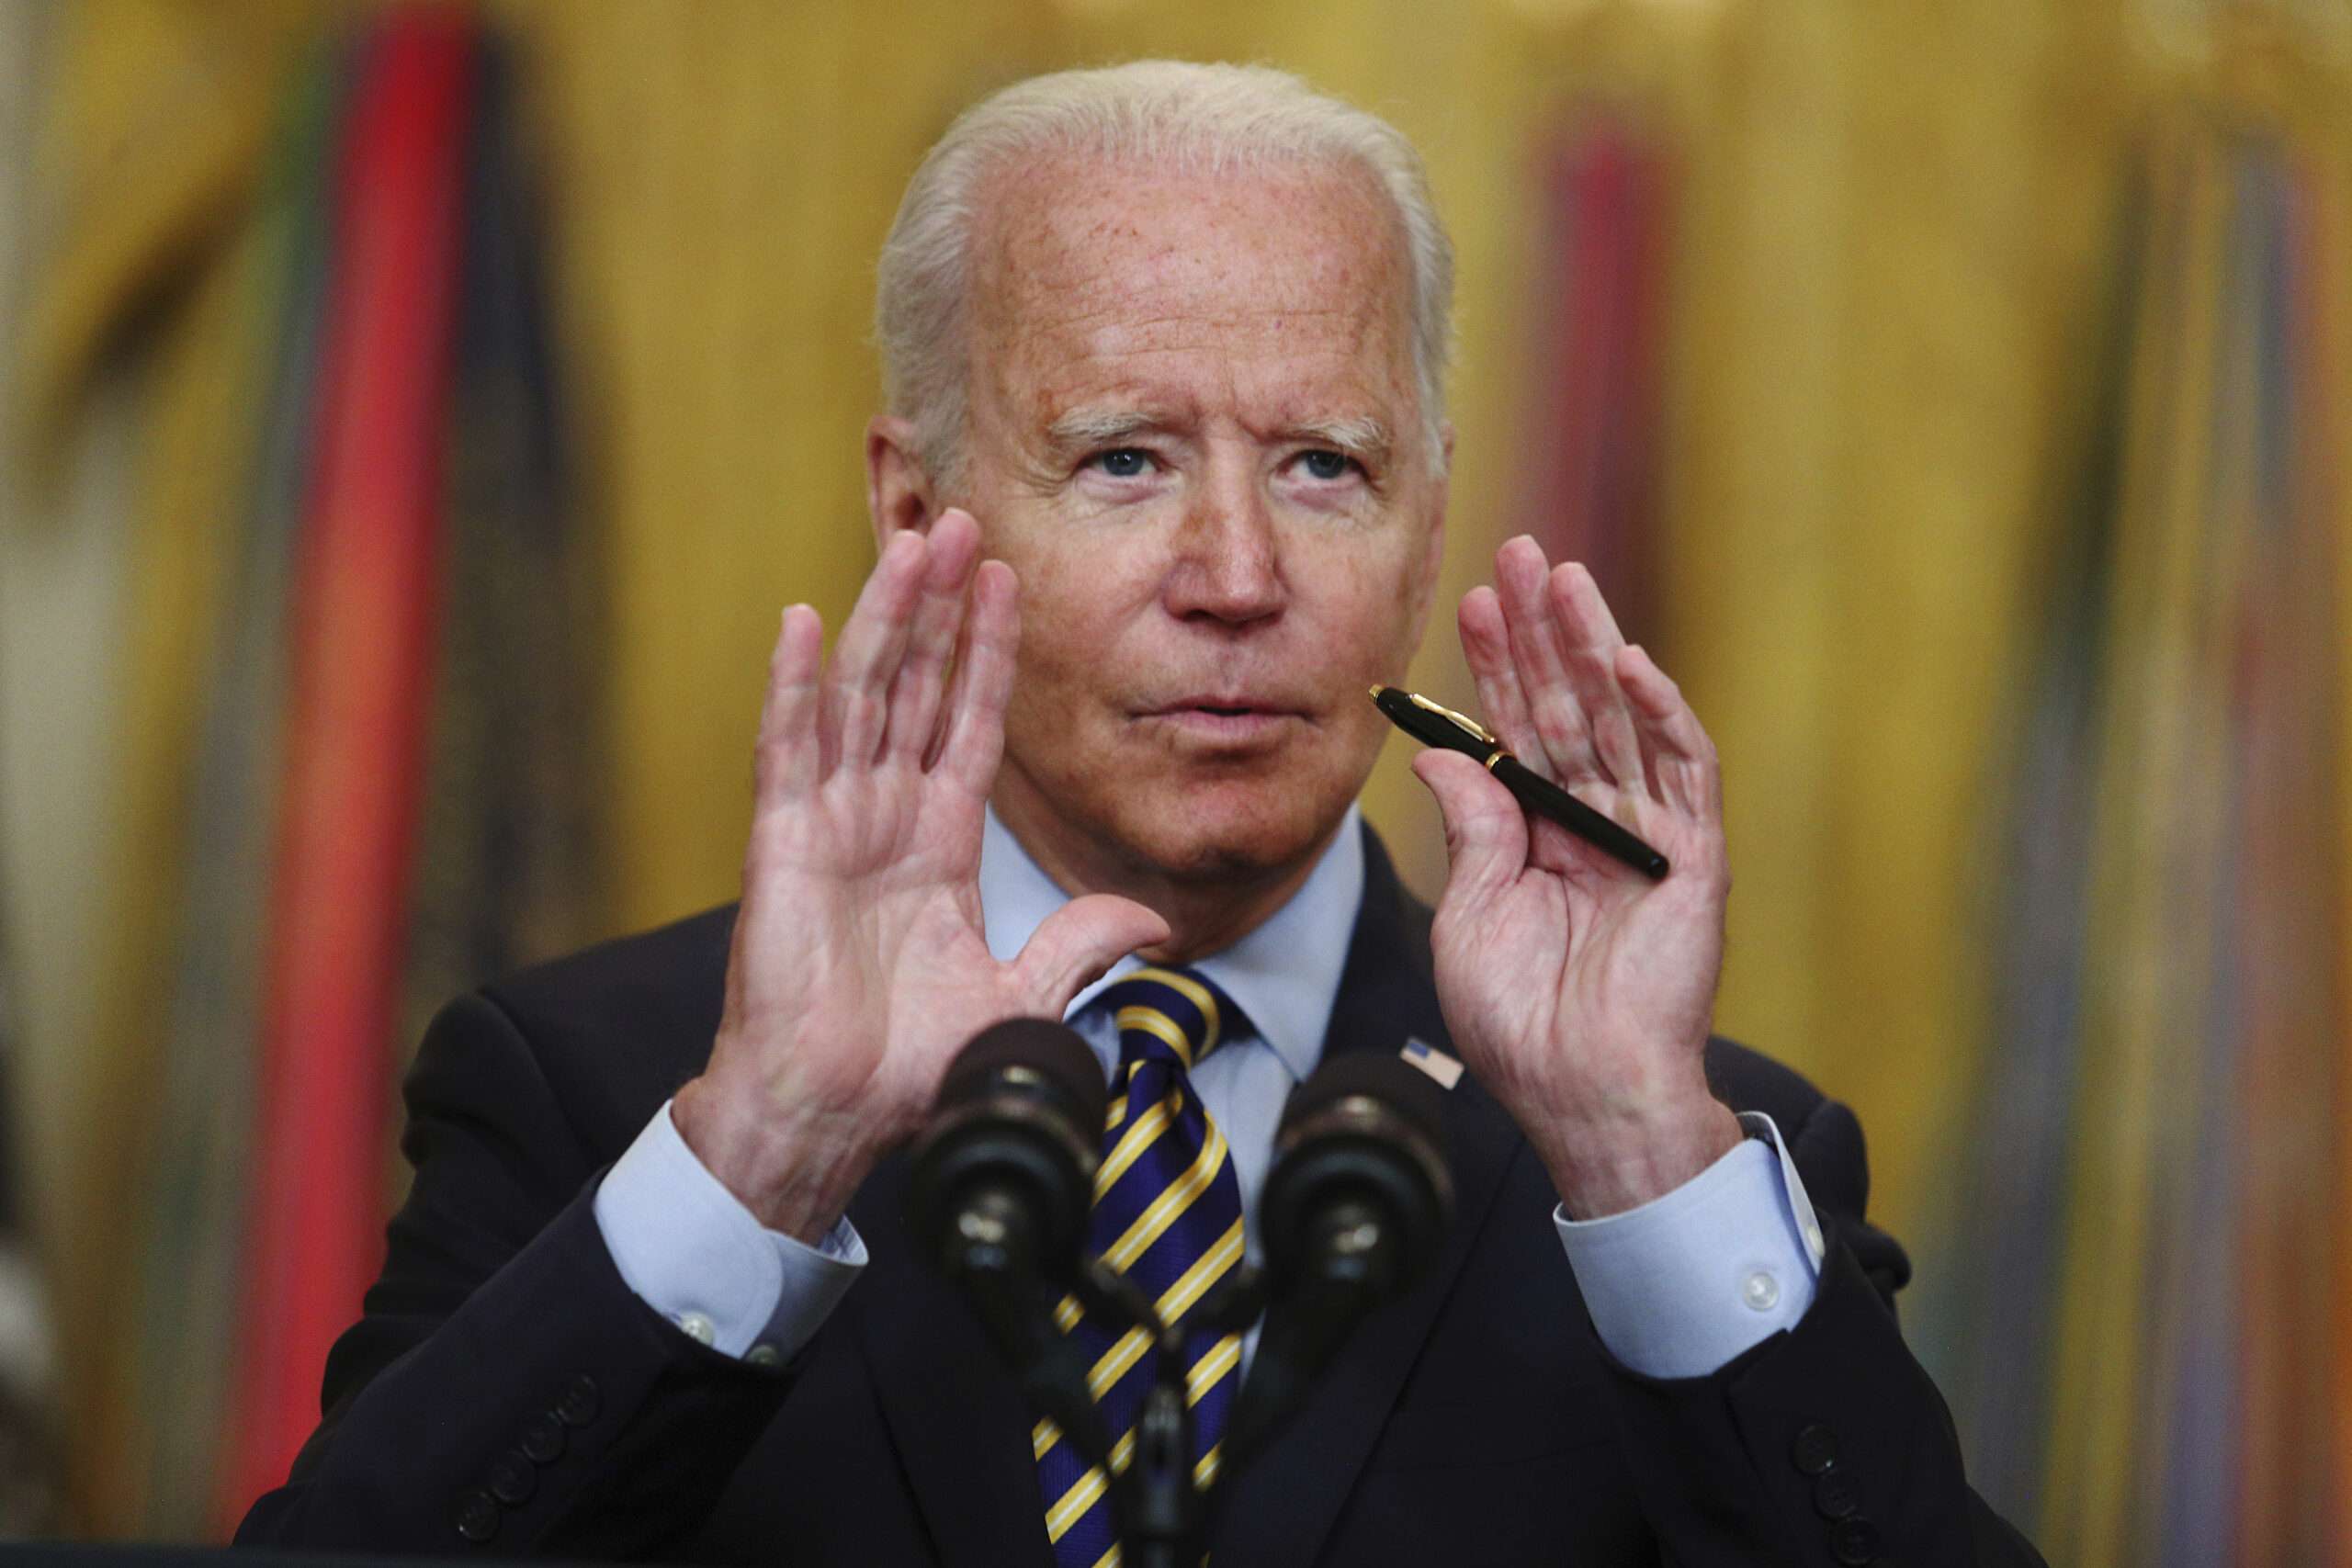 Joe Biden's Executive on 'Promoting Competition' Covers Everything Farmers Markets to Net Neutrality